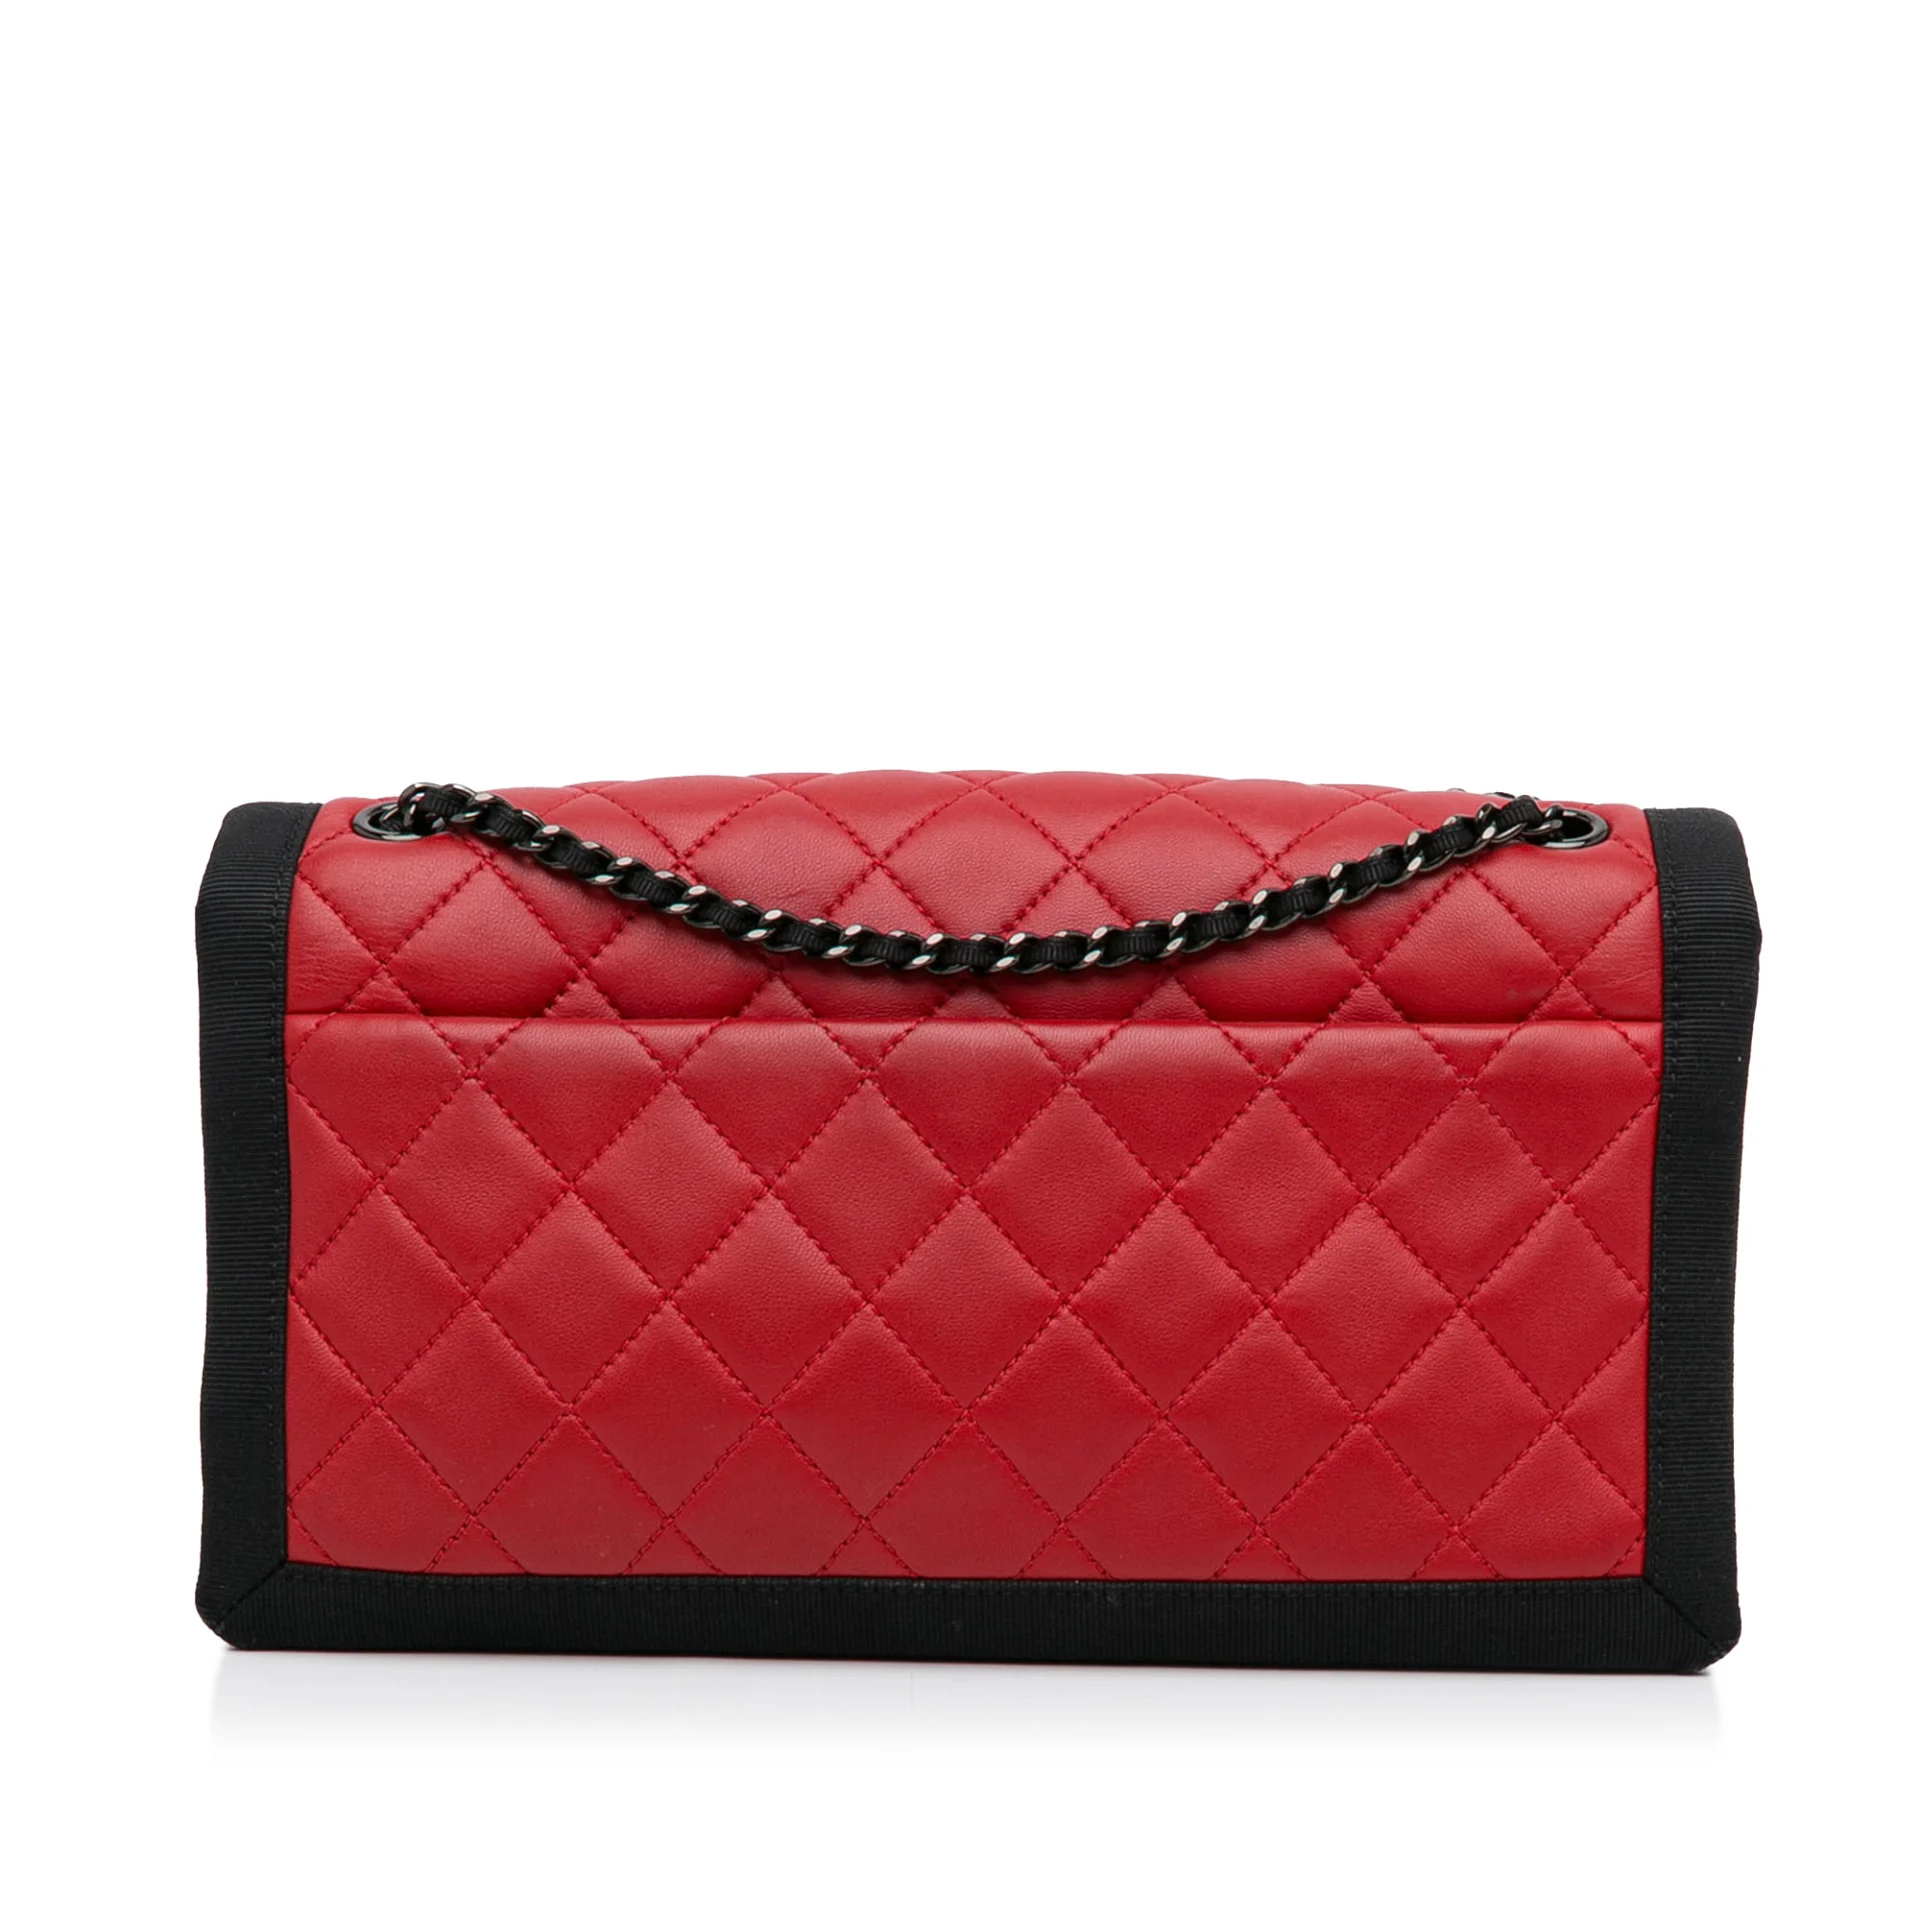 Chanel Medium Quilted Lambskin Grosgrain Two Tone Flap Bag